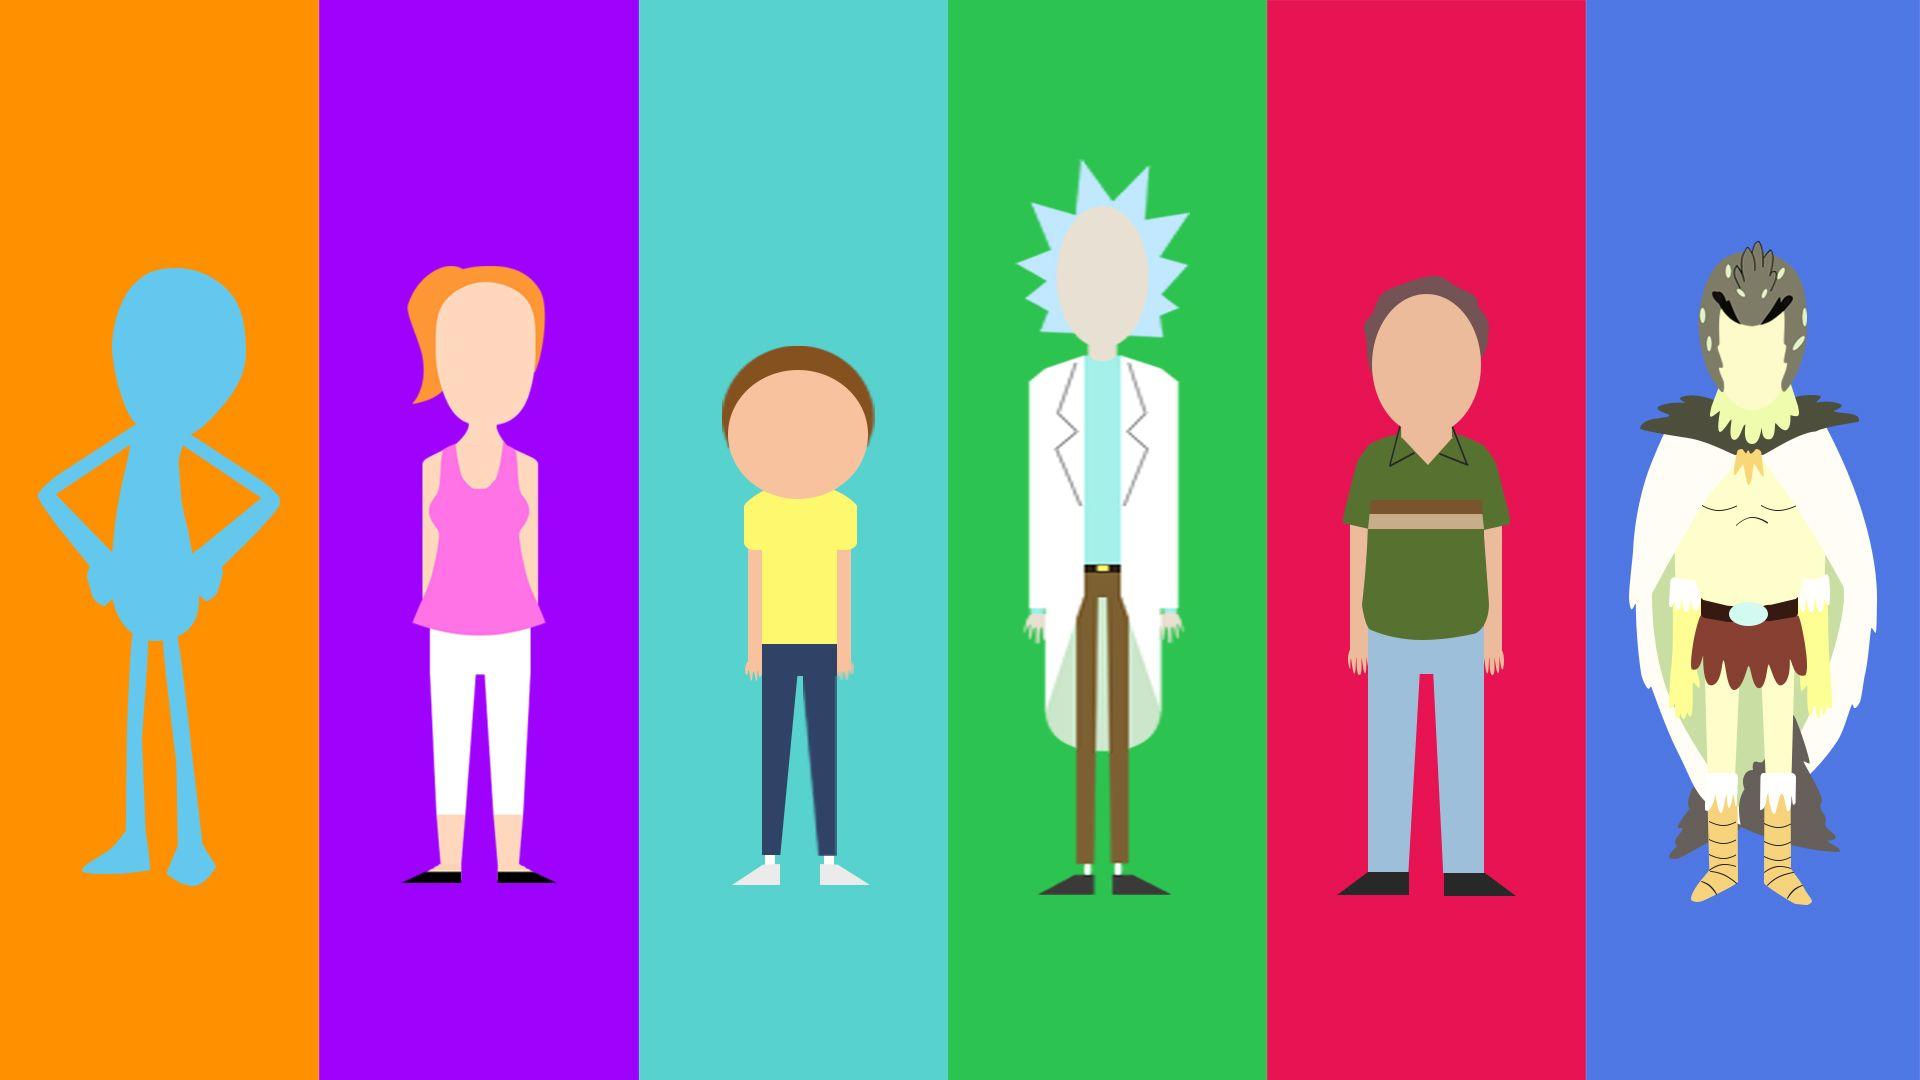 My minimalist Rick and Morty character collection [OC]. Wallpaper